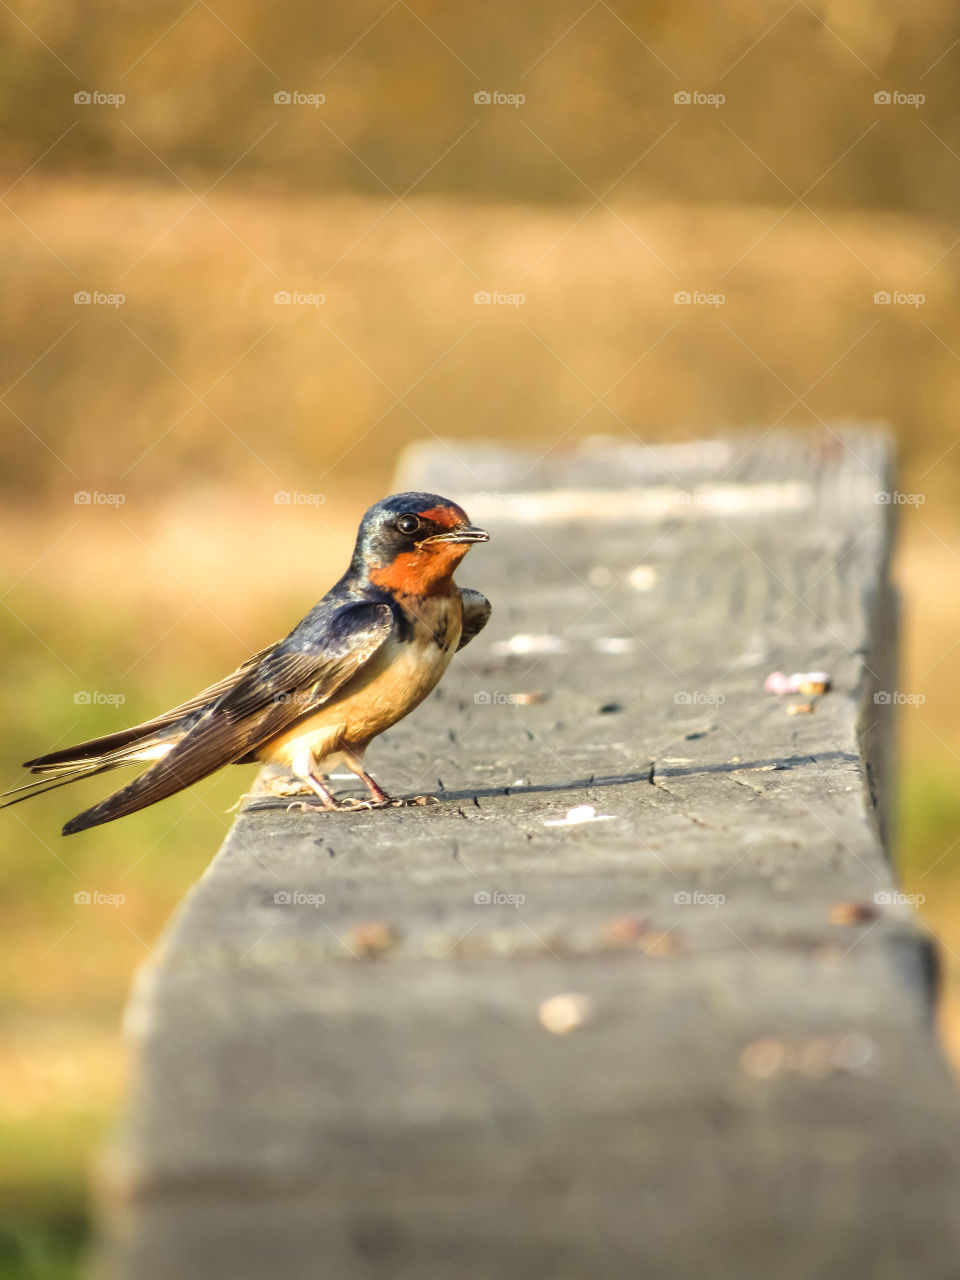 swallow bird perched on wood board outdoors